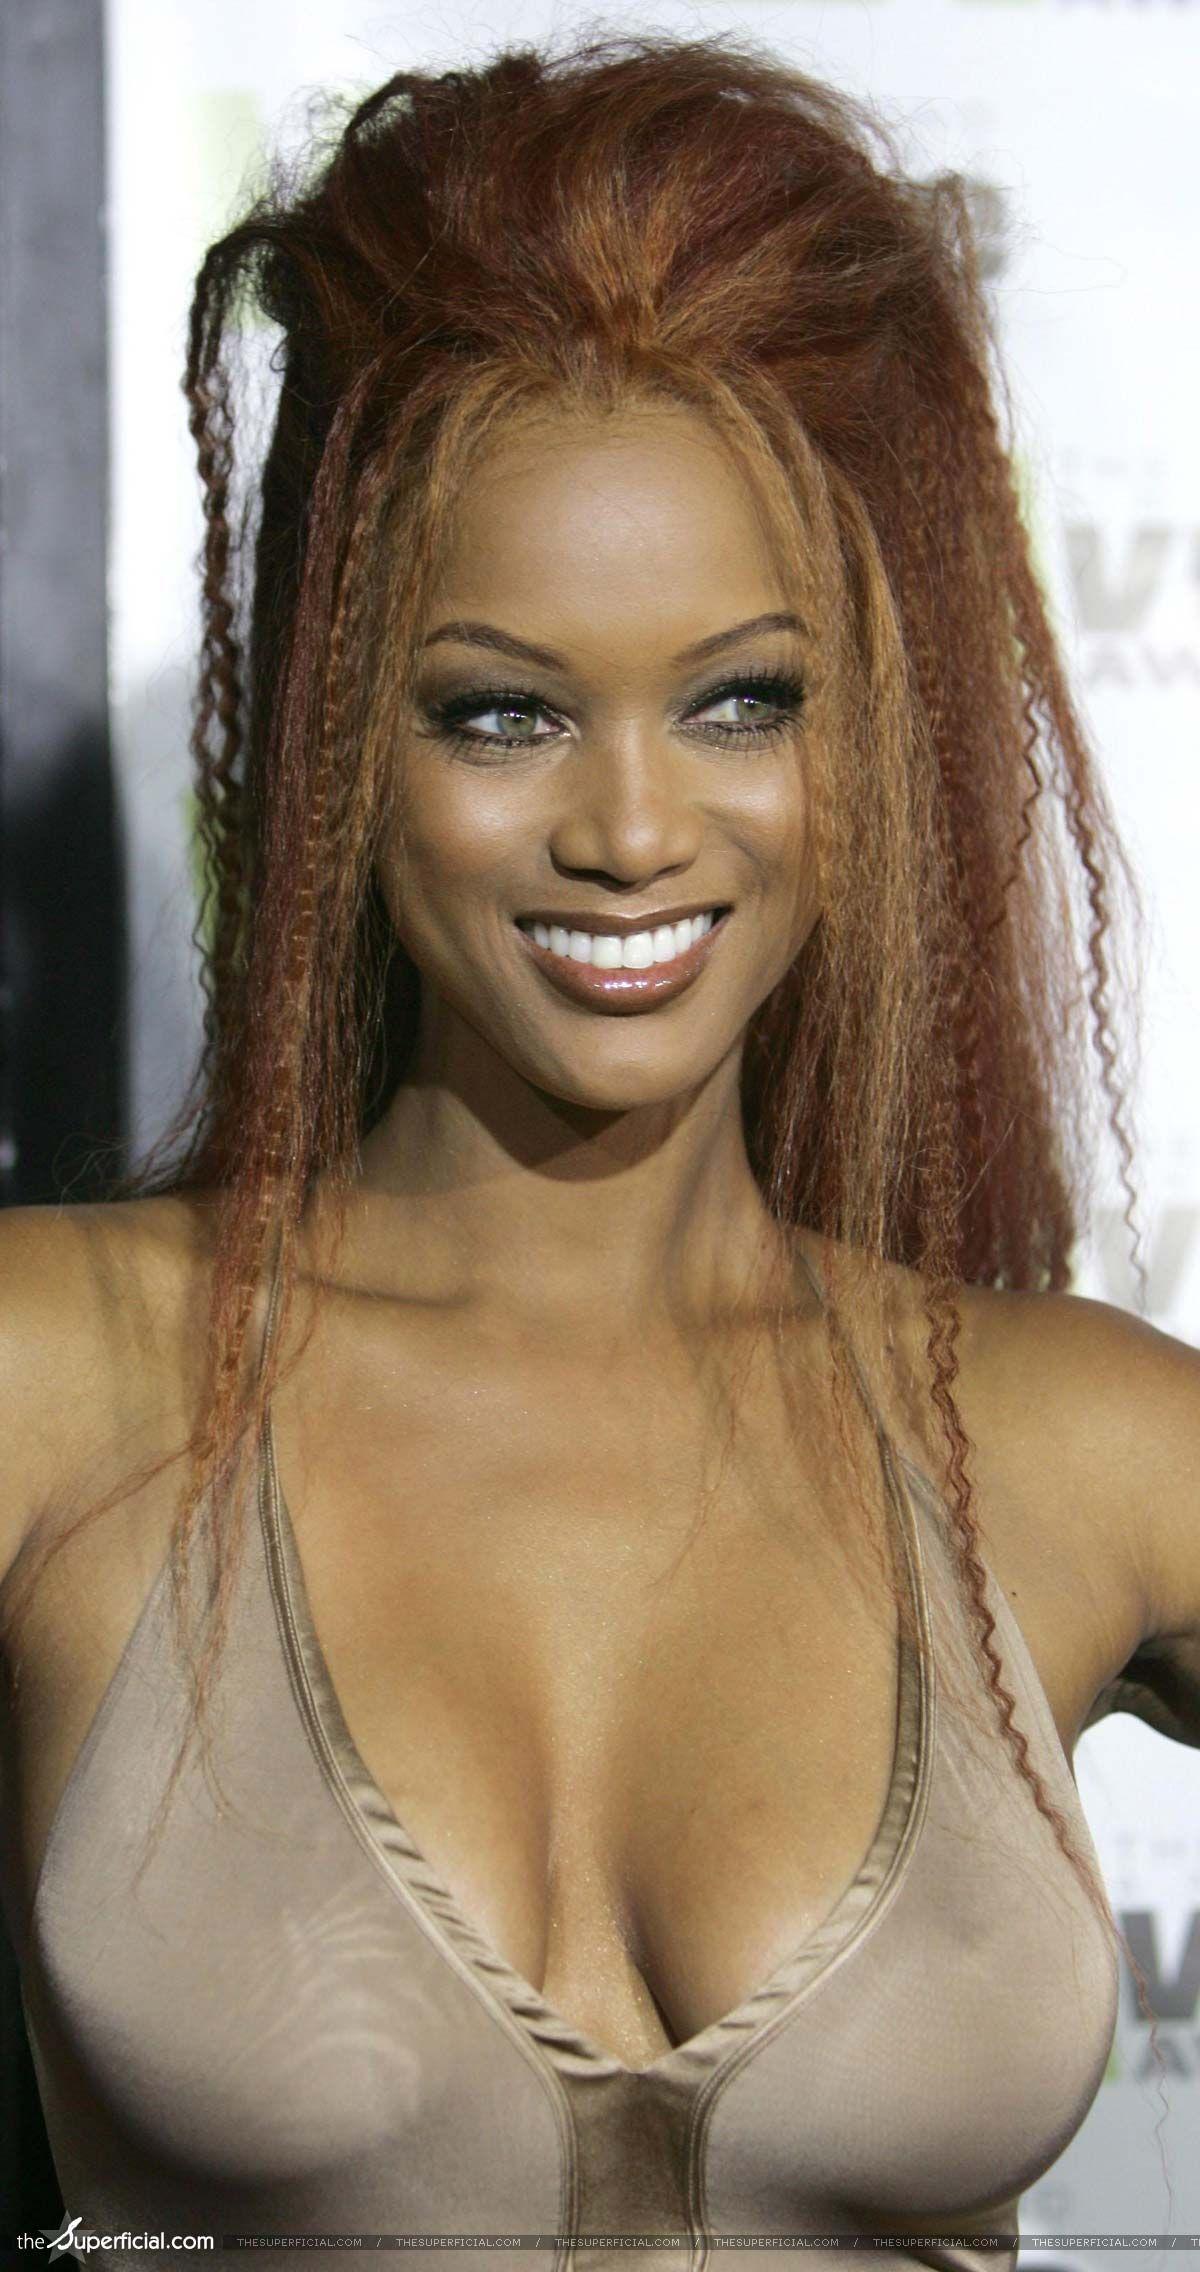 61 Hot Pictures Of Tyra Banks Will Get You Hot Under Your Collars | Best Of Comic Books